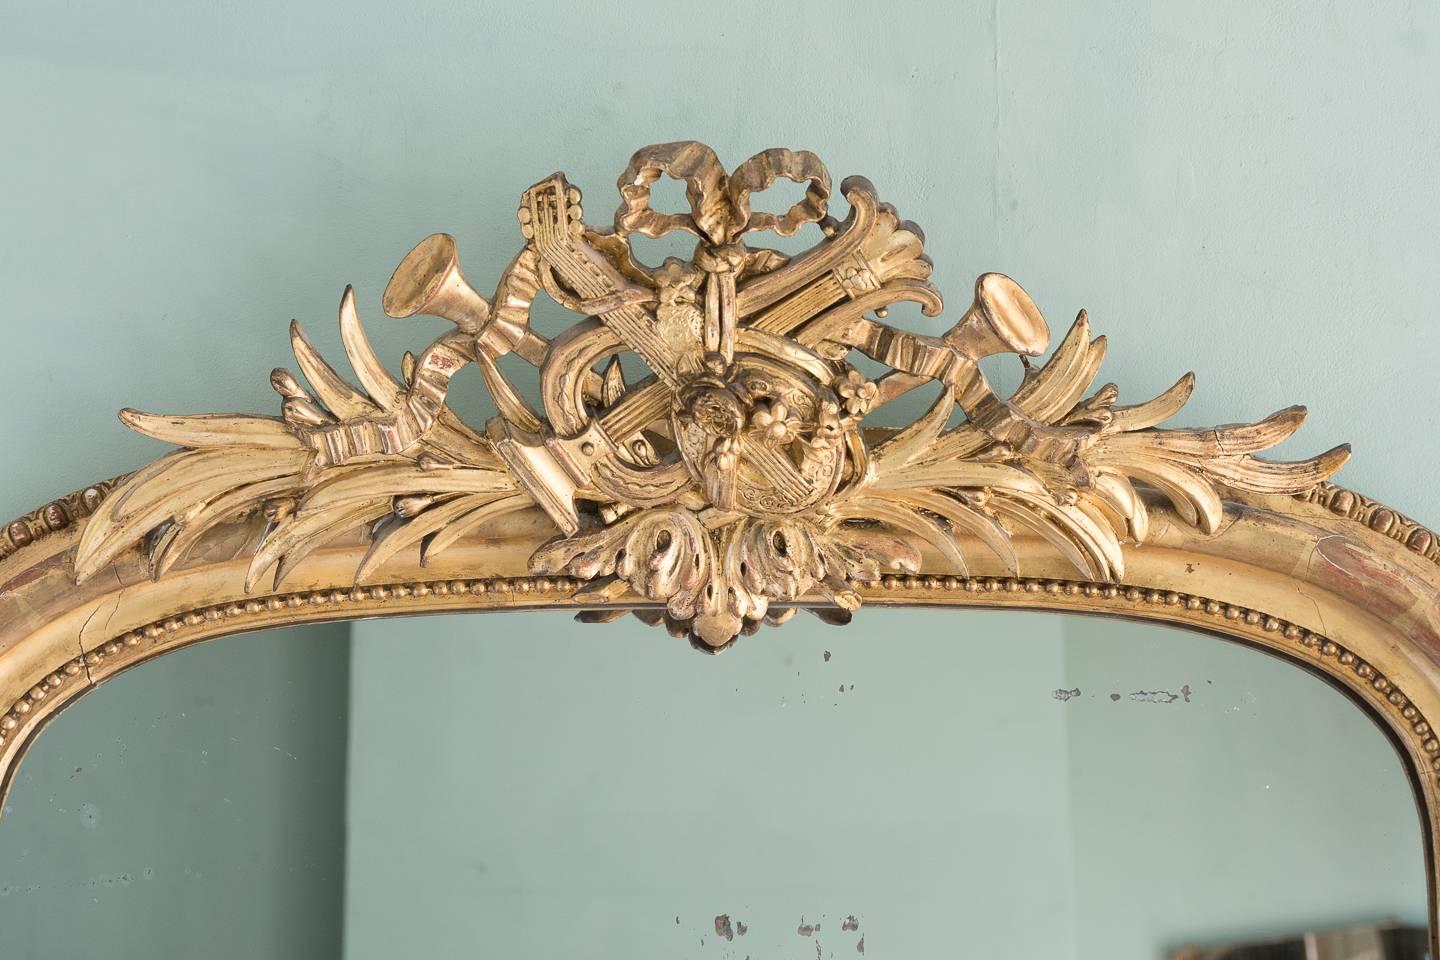 A 19th century French gilt overmantel mirror, circa 1850-1870, with cresting of ribbons and musical instruments, the arch top frame with egg and dart, bead and foliate decoration.

It could be supposed from the iconography of the cresting that this